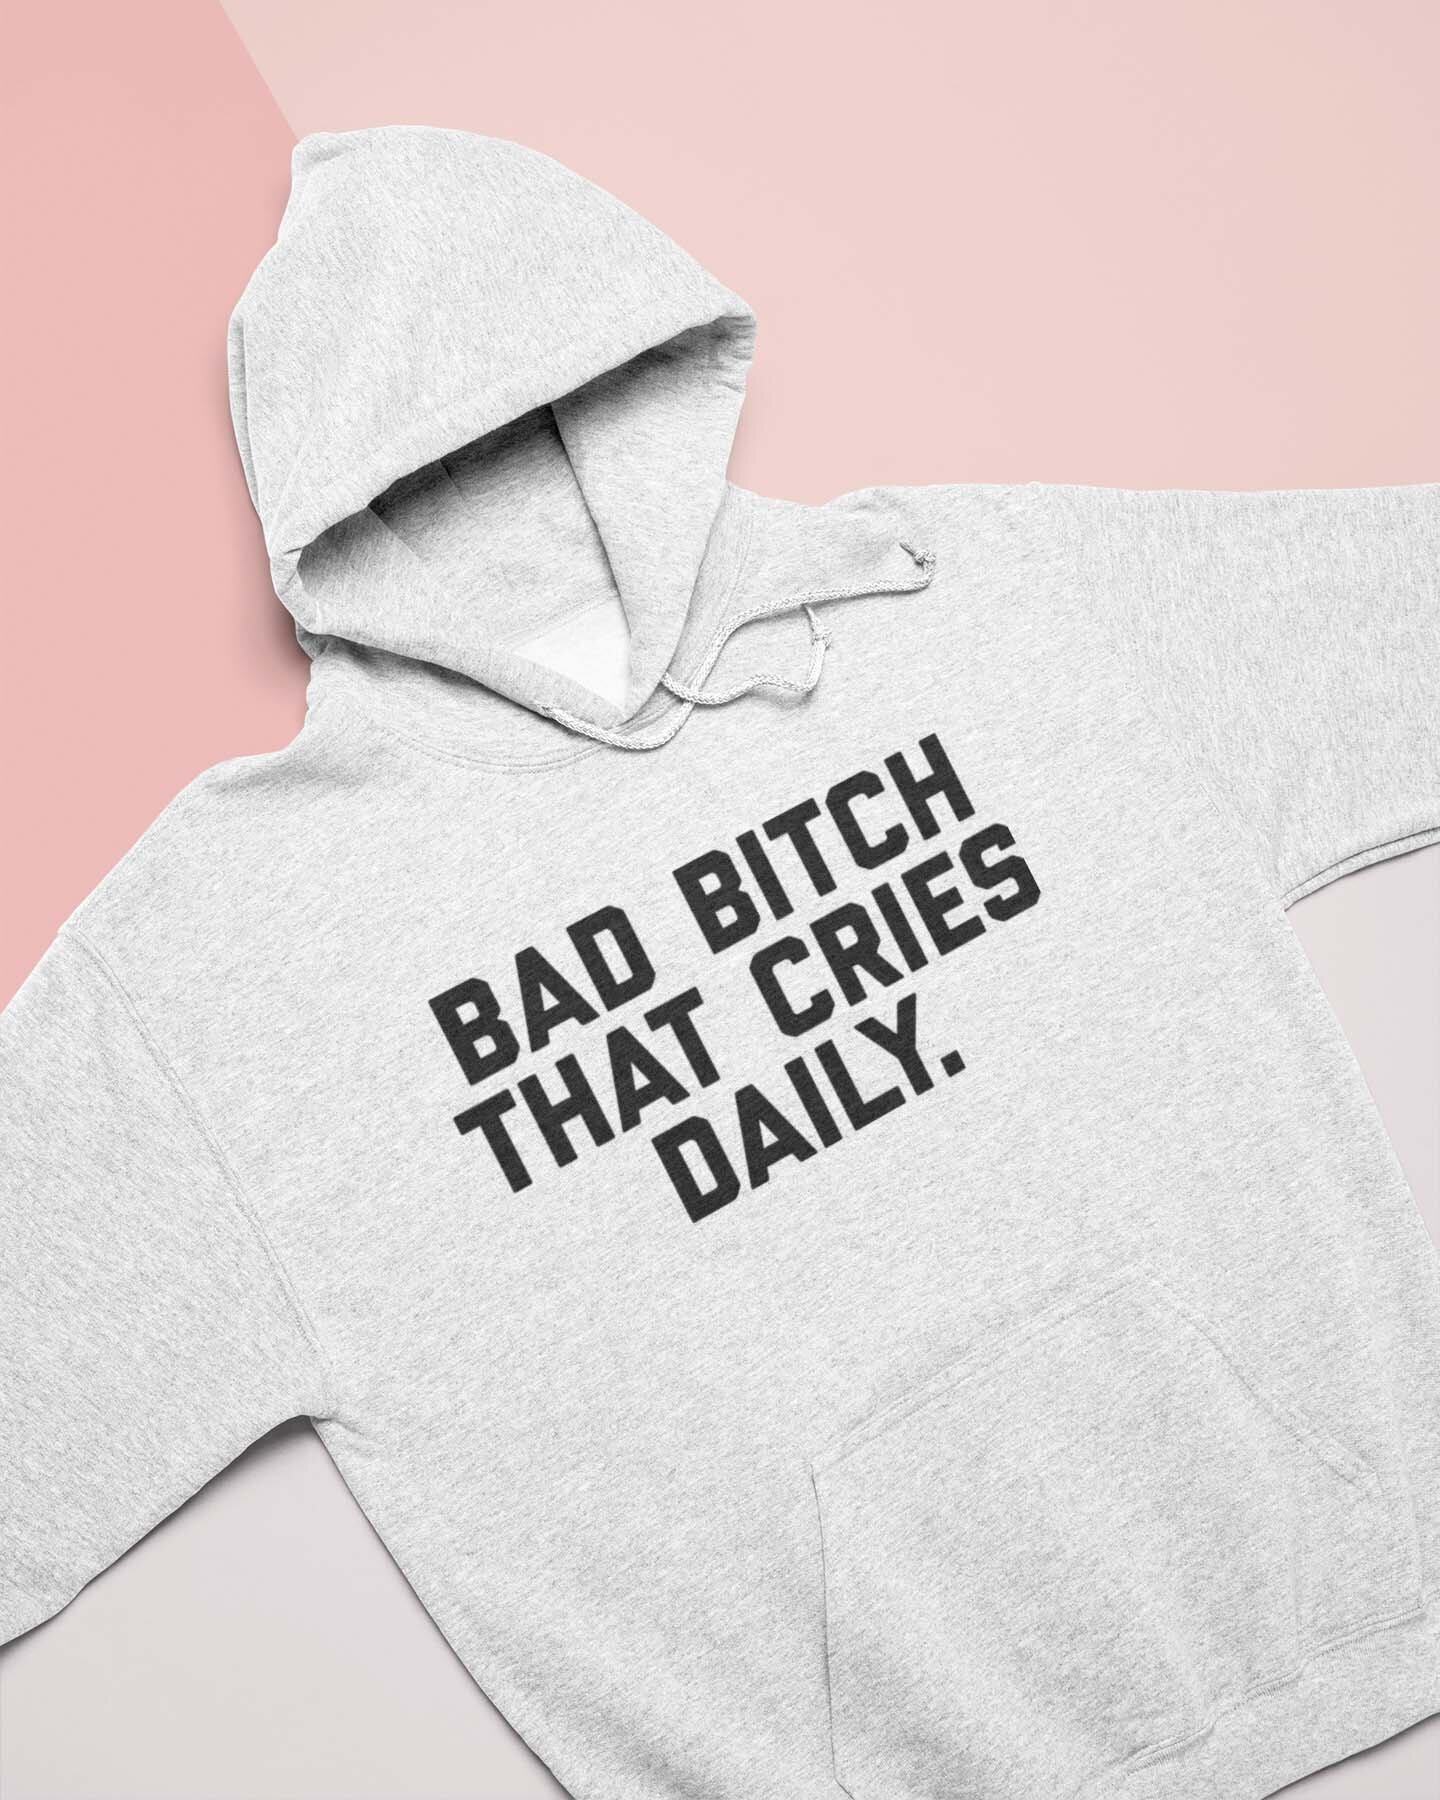 A Bitch Would Sweatshirt 3 Things I Wish Funny Inappropriate Sarcastic Sweatshirt for People Who Are Tired of Being Tested